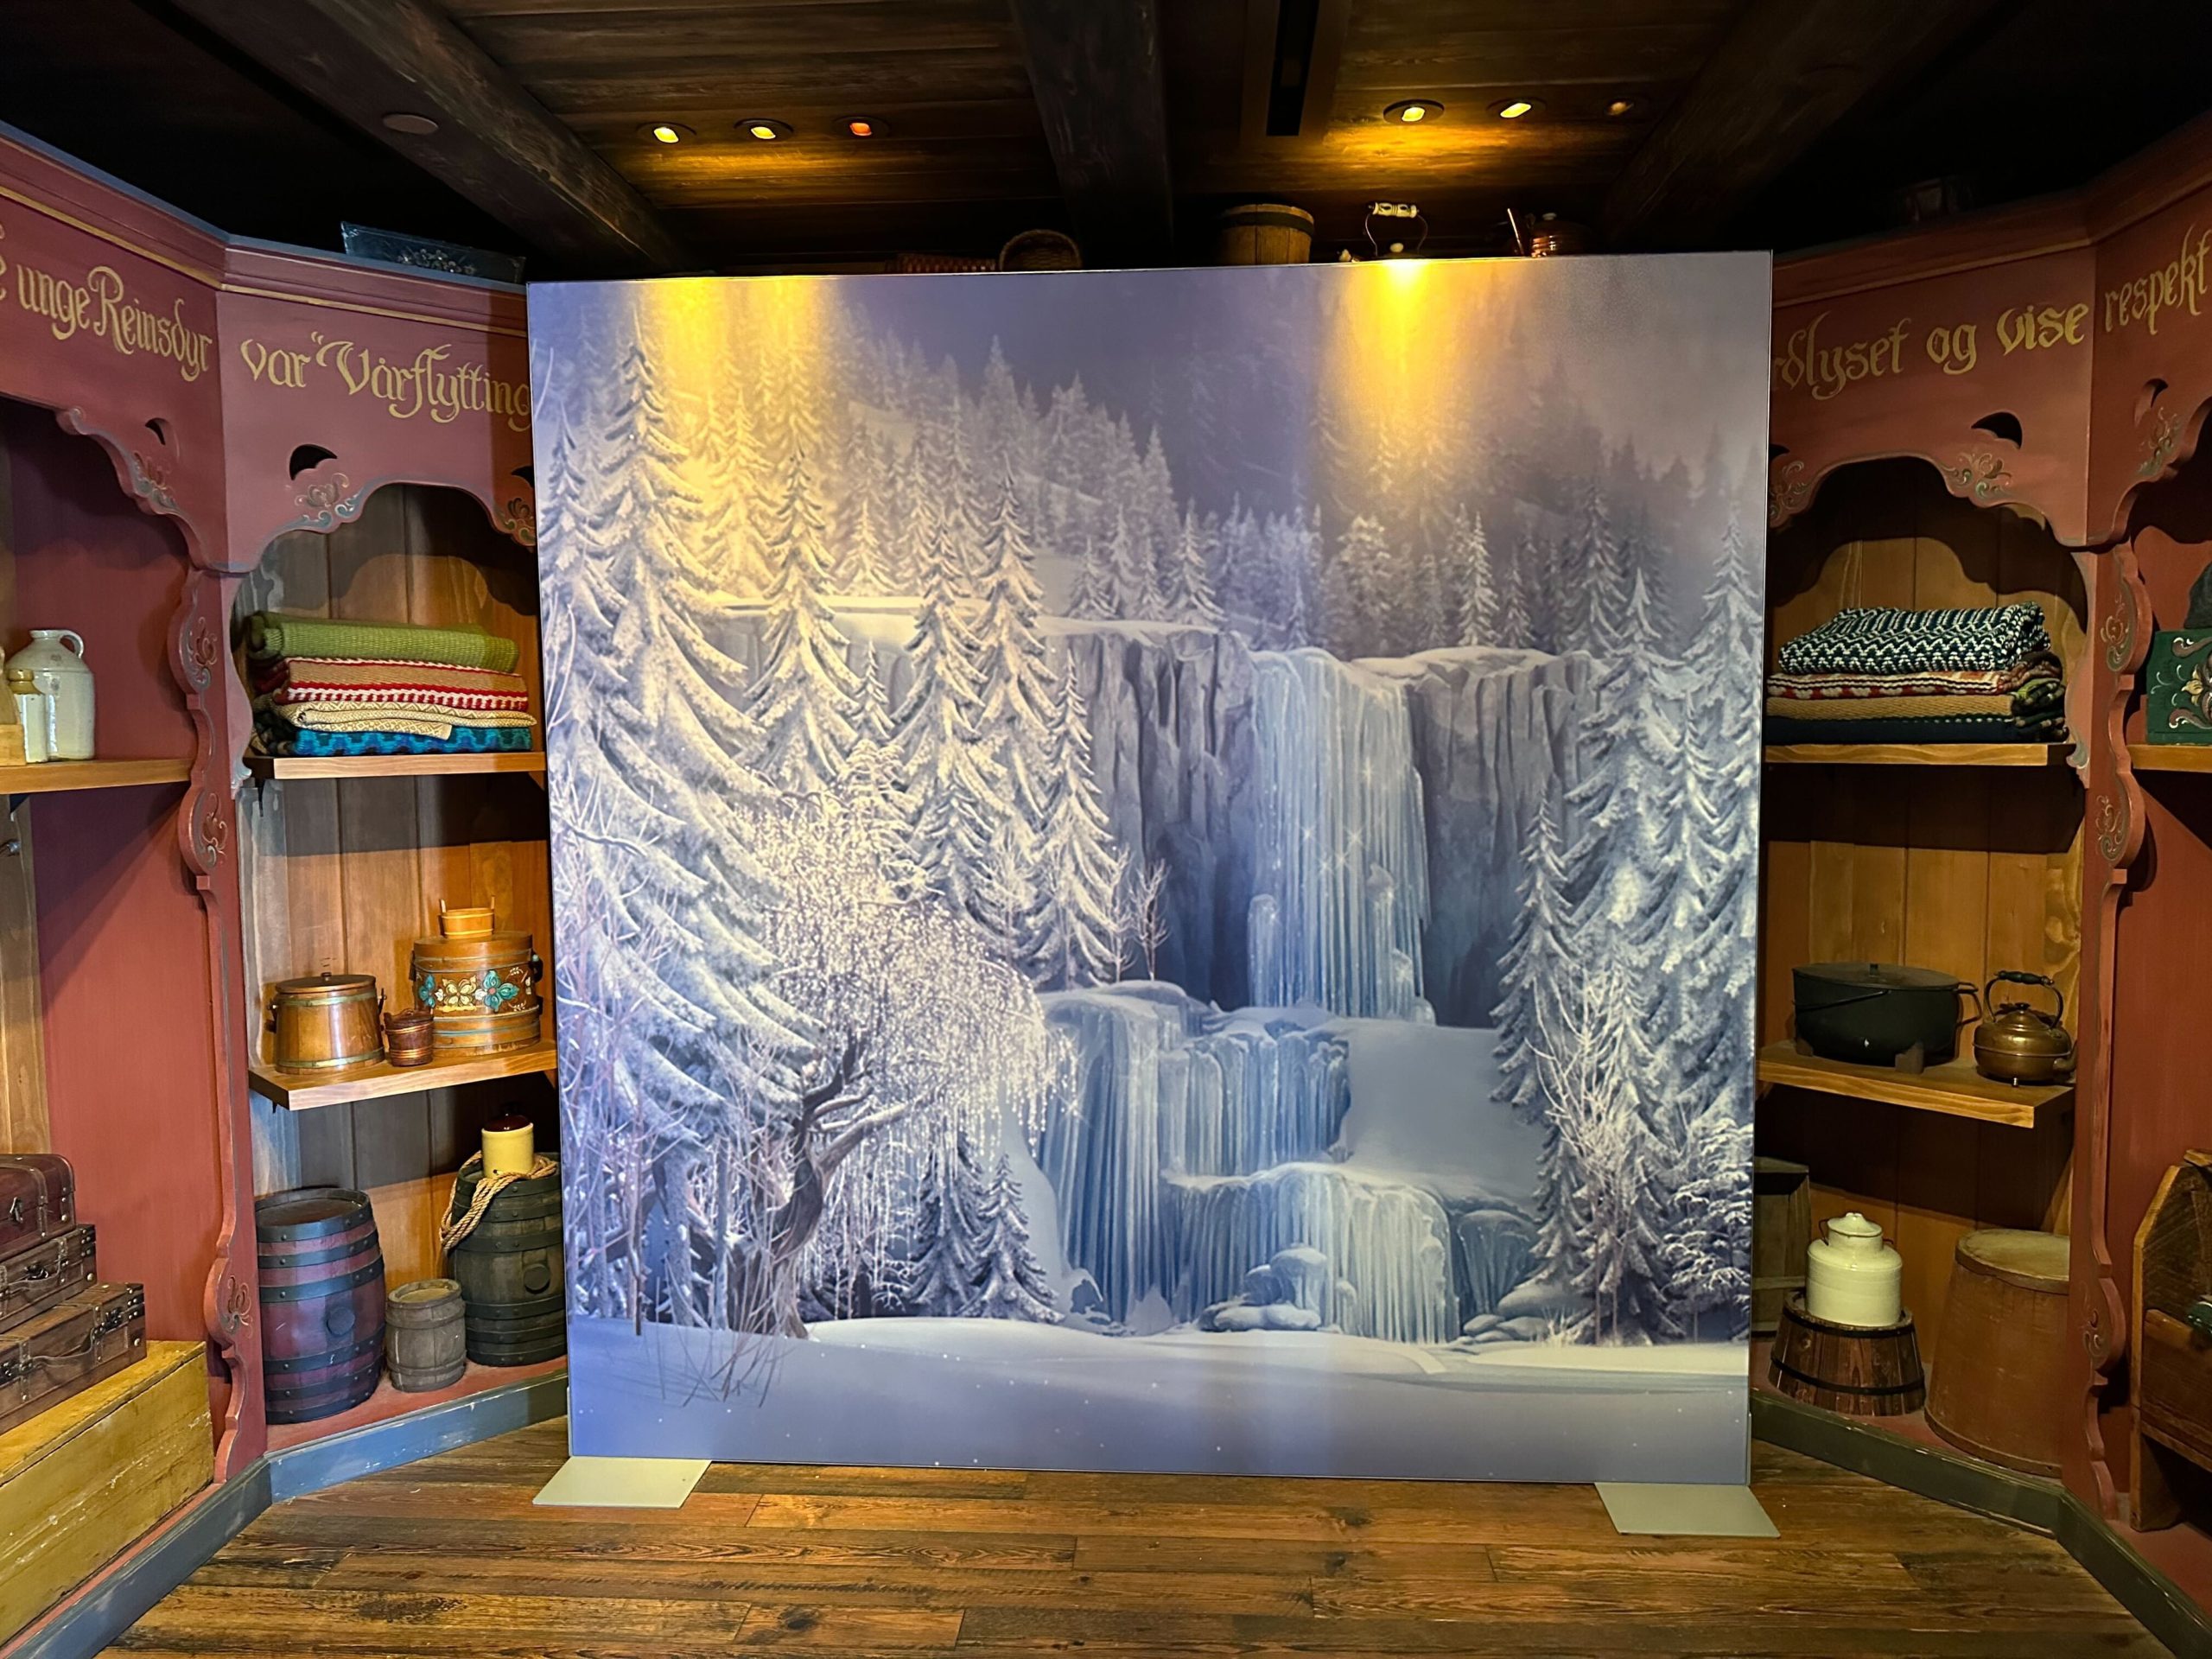 New photopass opportunity at the wandering reindeer at Norway pavilion